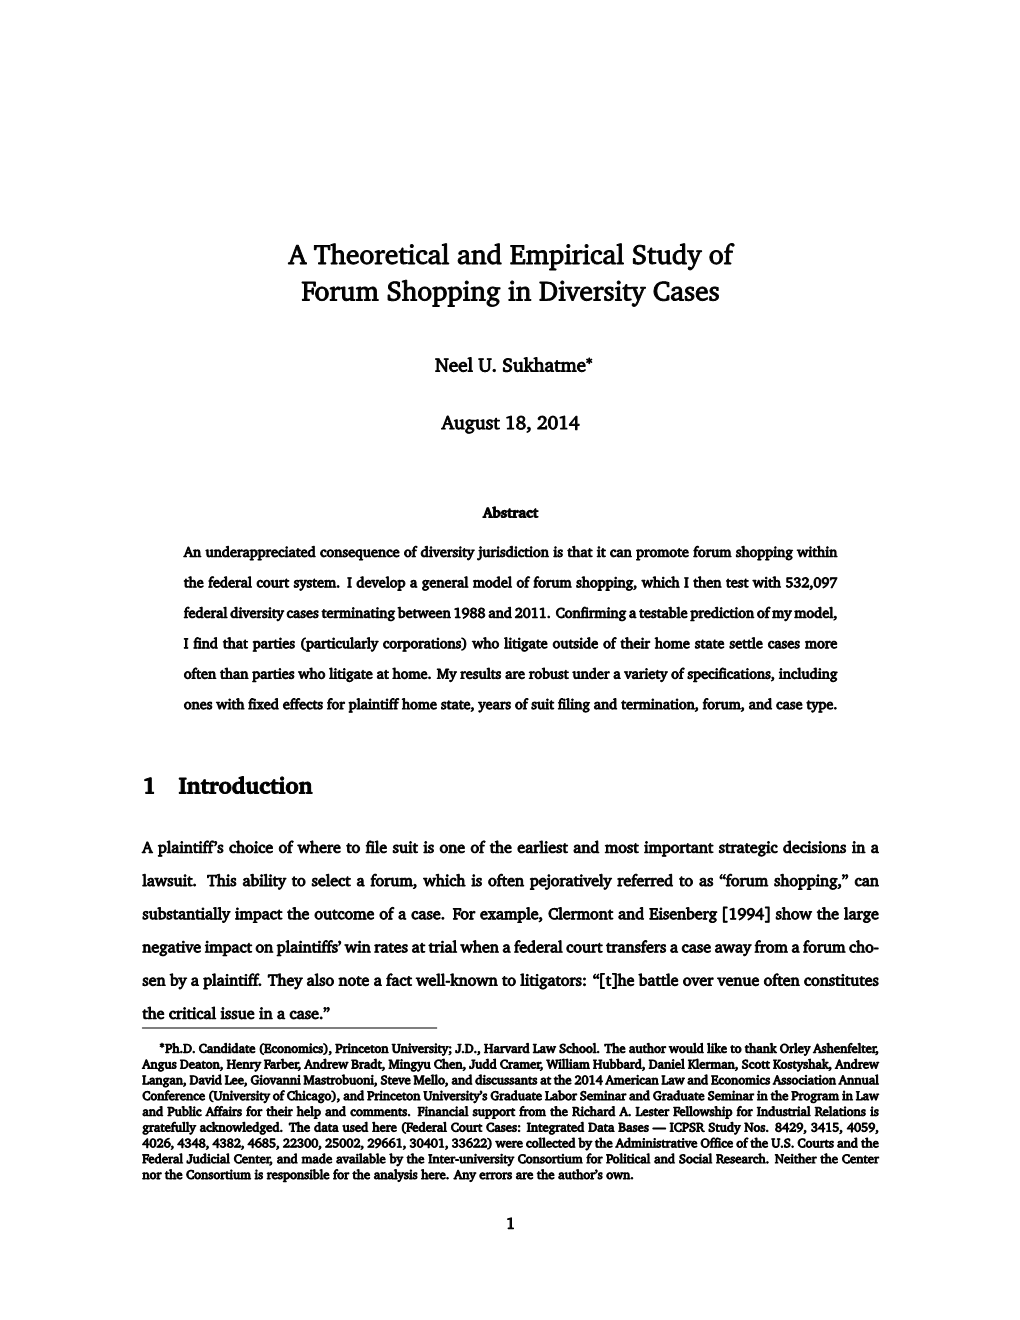 A Theoretical and Empirical Study of Forum Shopping in Diversity Cases